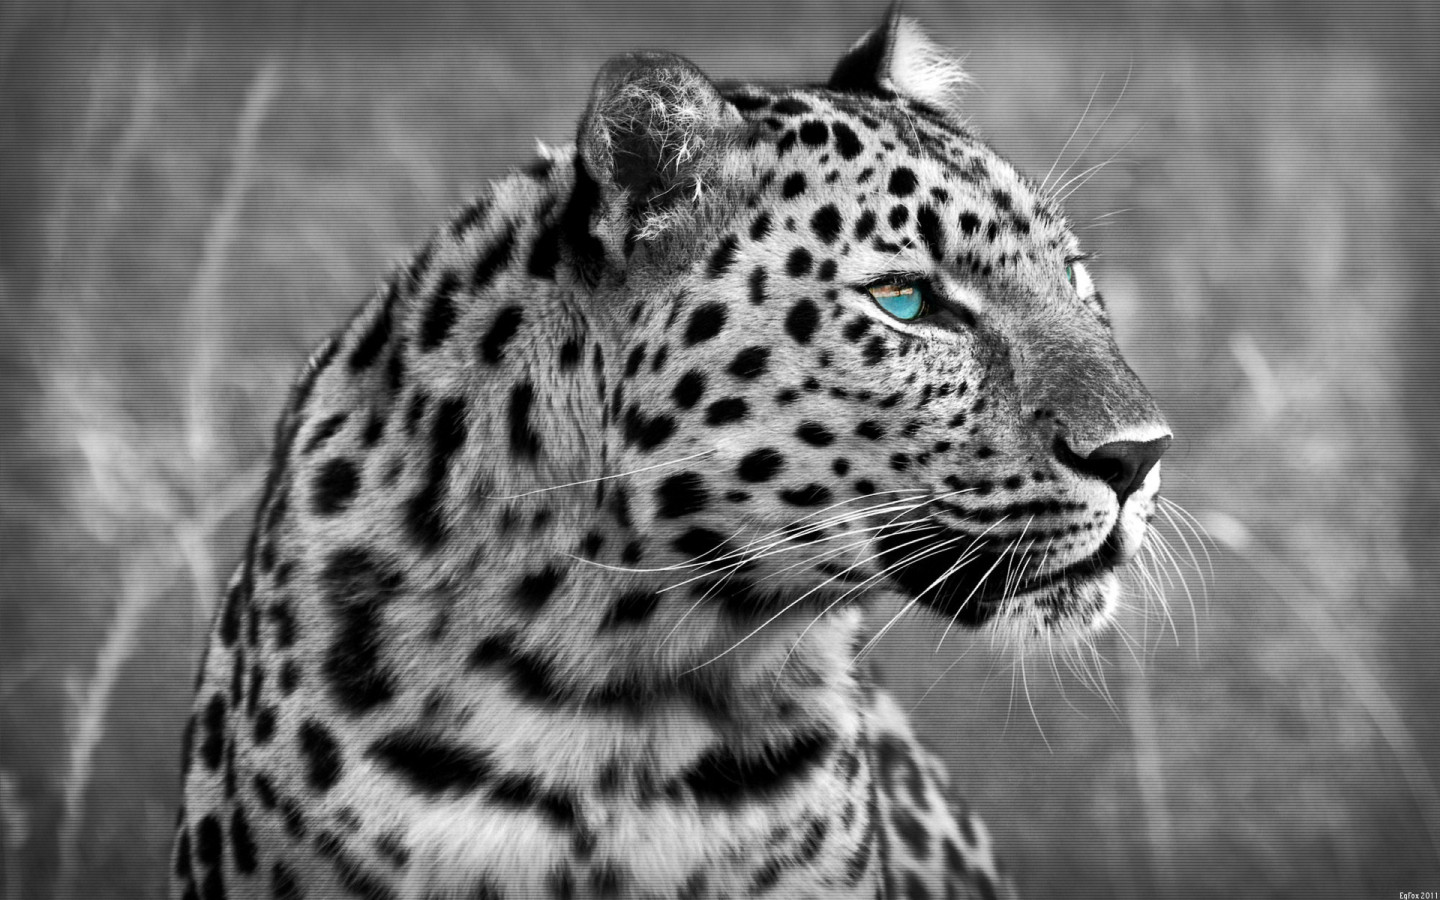 Black and white leopard